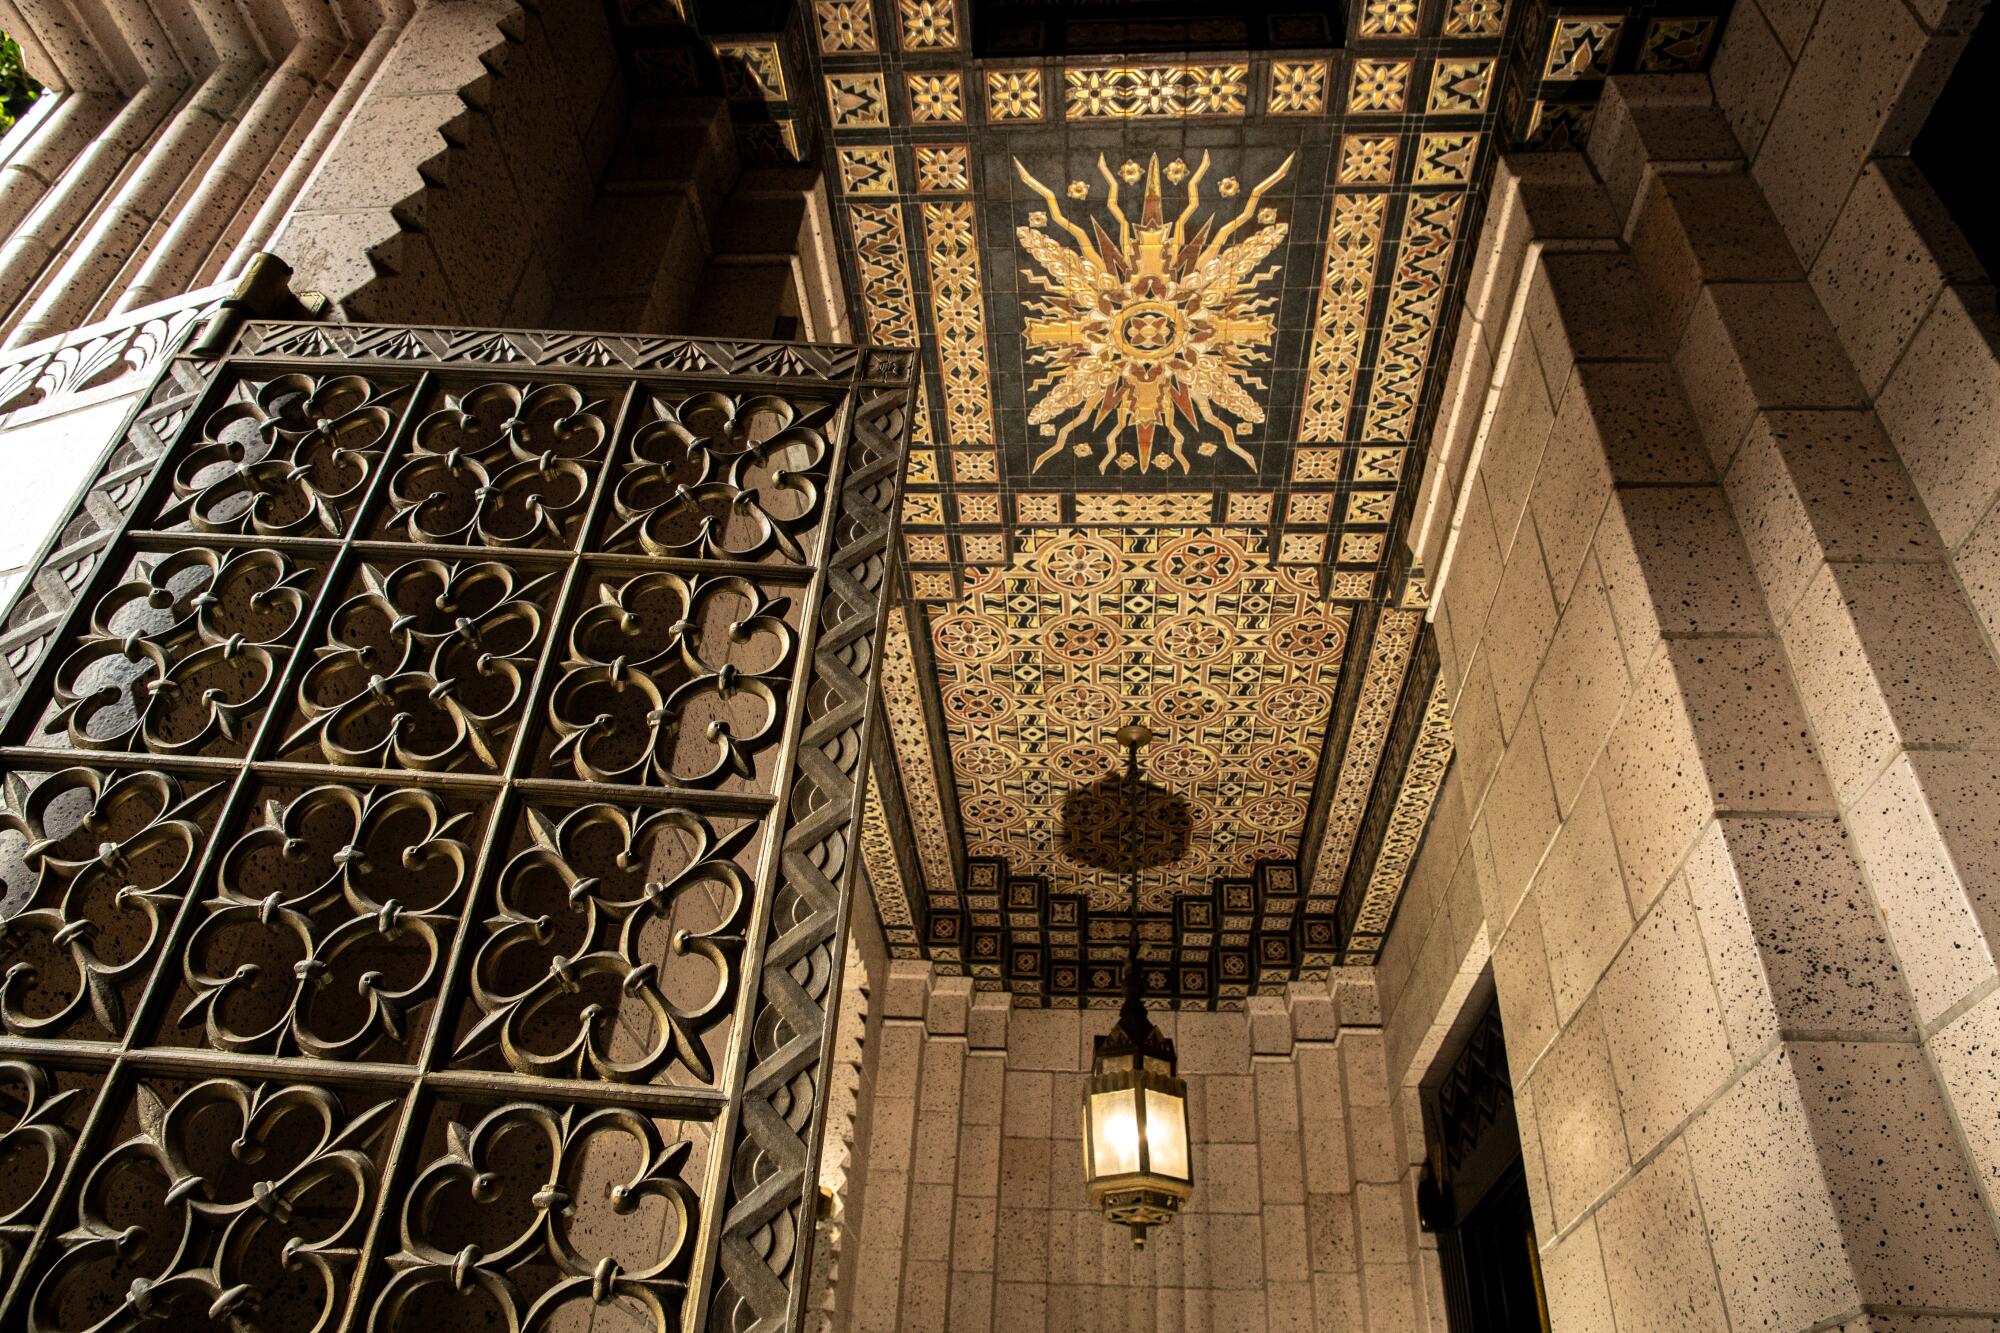 The ornate ceiling of the Trust Building on Spring Street.